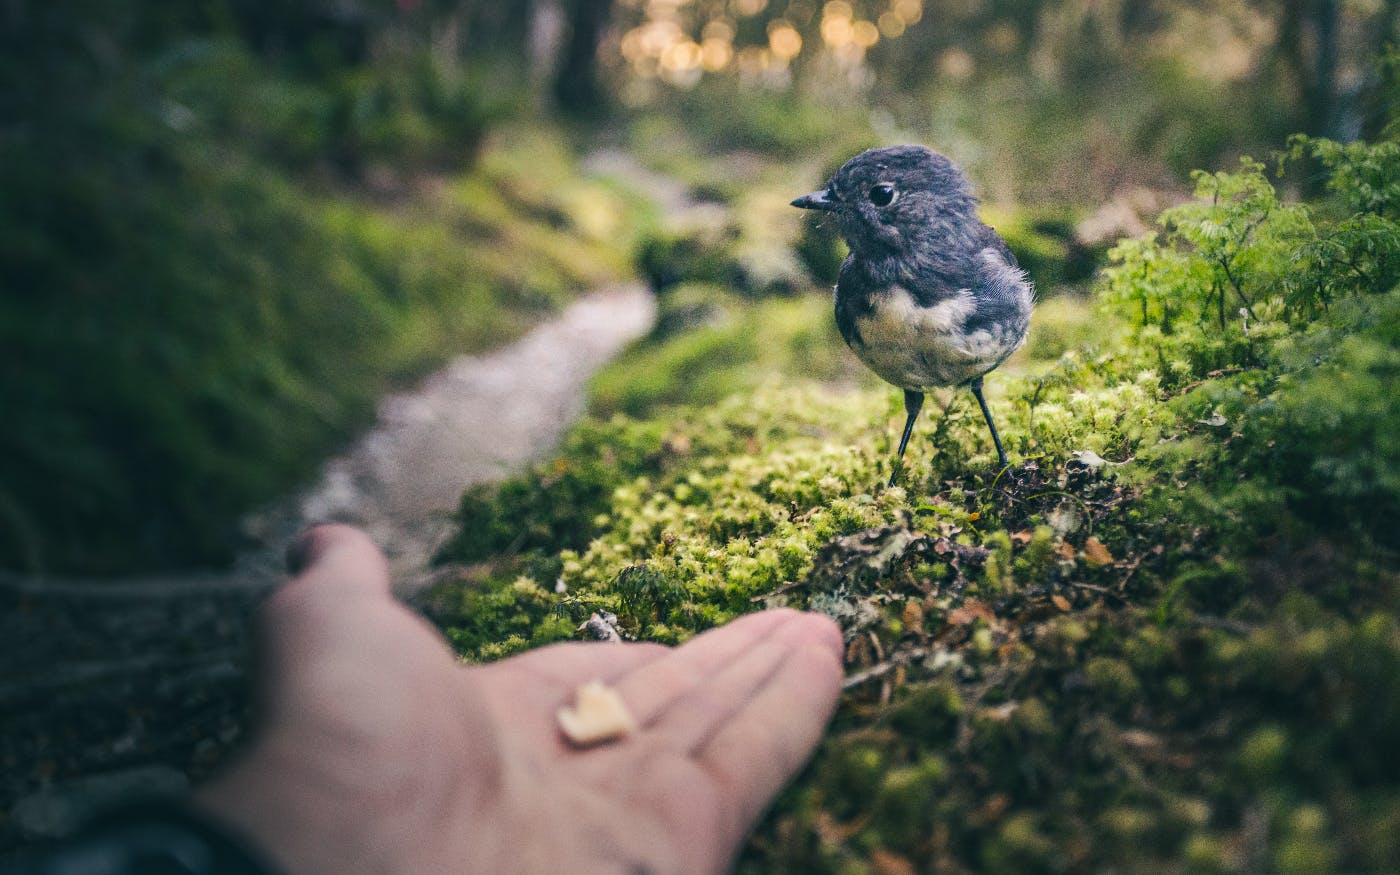 a piece of bread being offered to a blue bird